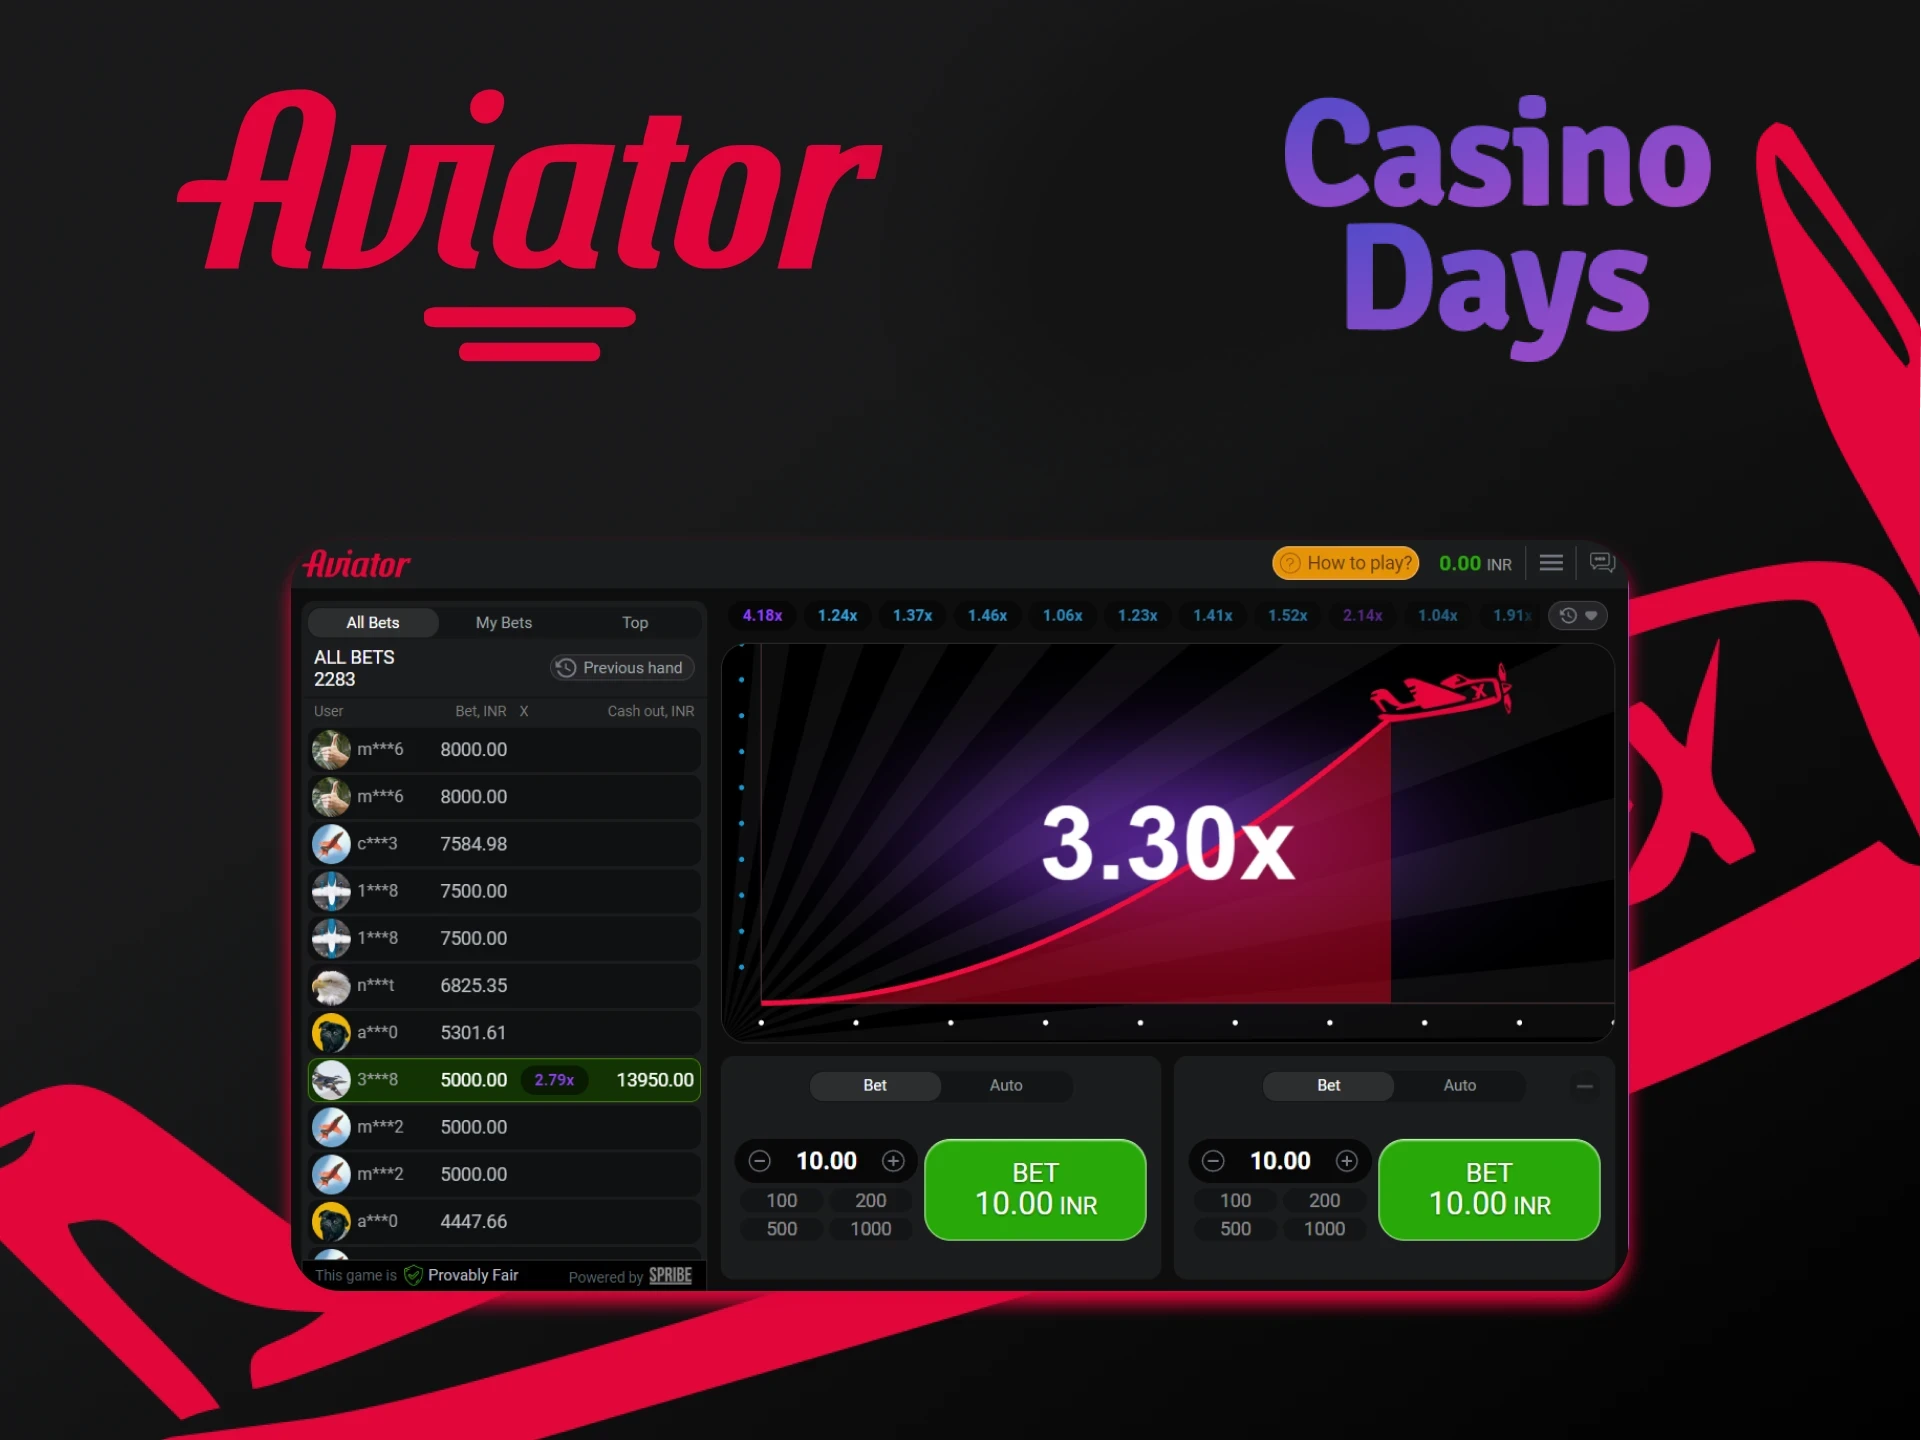 Find out all about Aviator at Casino Days.